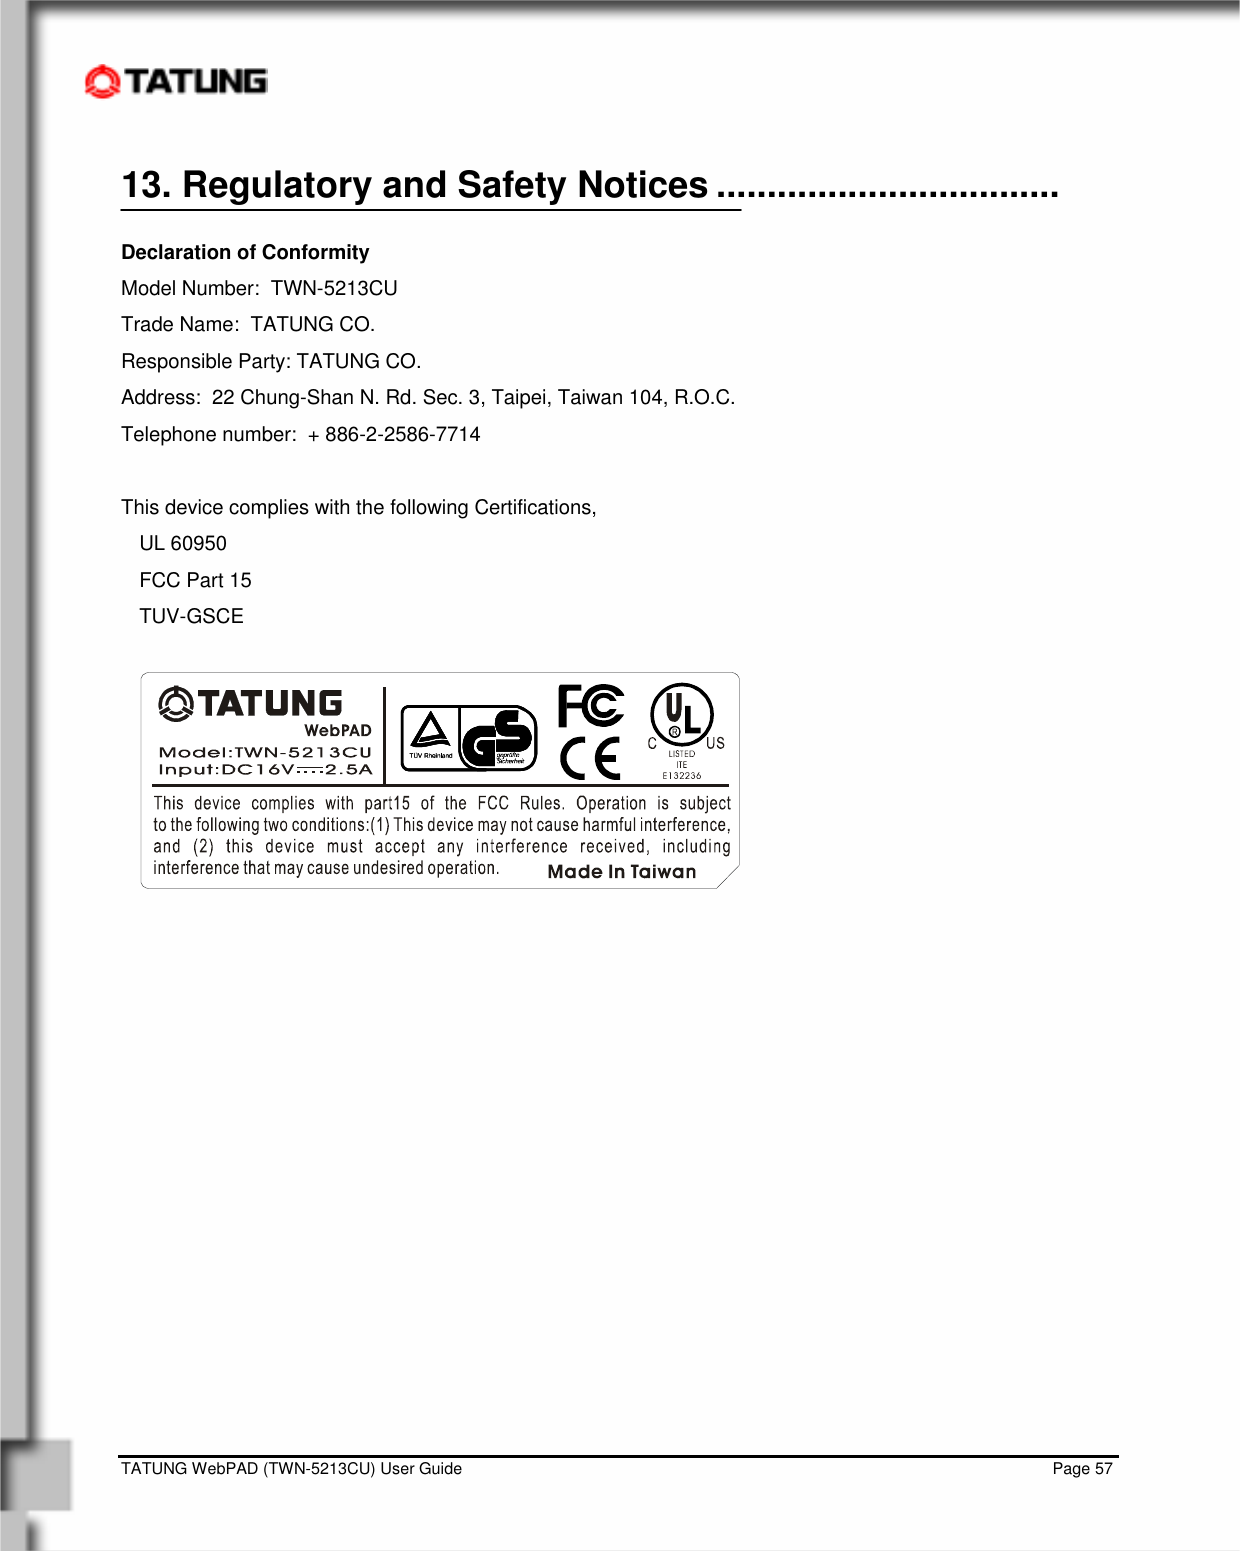    TATUNG WebPAD (TWN-5213CU) User Guide                                                                                                                                   Page 57 13. Regulatory and Safety Notices ..................................  Declaration of Conformity Model Number:  TWN-5213CU Trade Name:  TATUNG CO. Responsible Party: TATUNG CO. Address:  22 Chung-Shan N. Rd. Sec. 3, Taipei, Taiwan 104, R.O.C. Telephone number:  + 886-2-2586-7714  This device complies with the following Certifications,    UL 60950 FCC Part 15  TUV-GSCE   